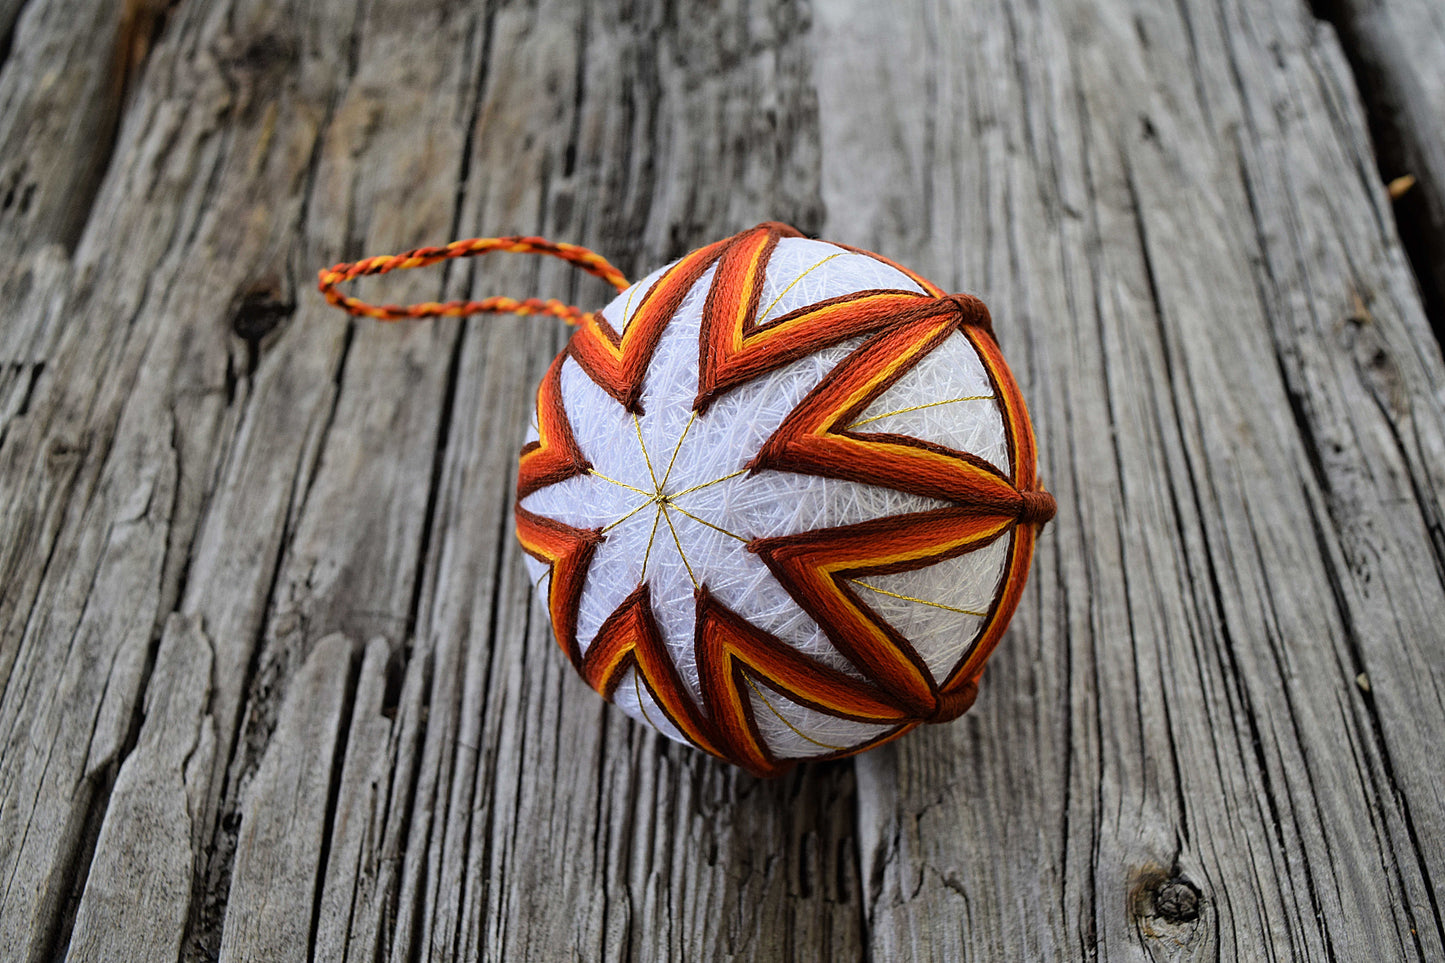 Temari ball embroidered in a star pattern in gold rust and brown